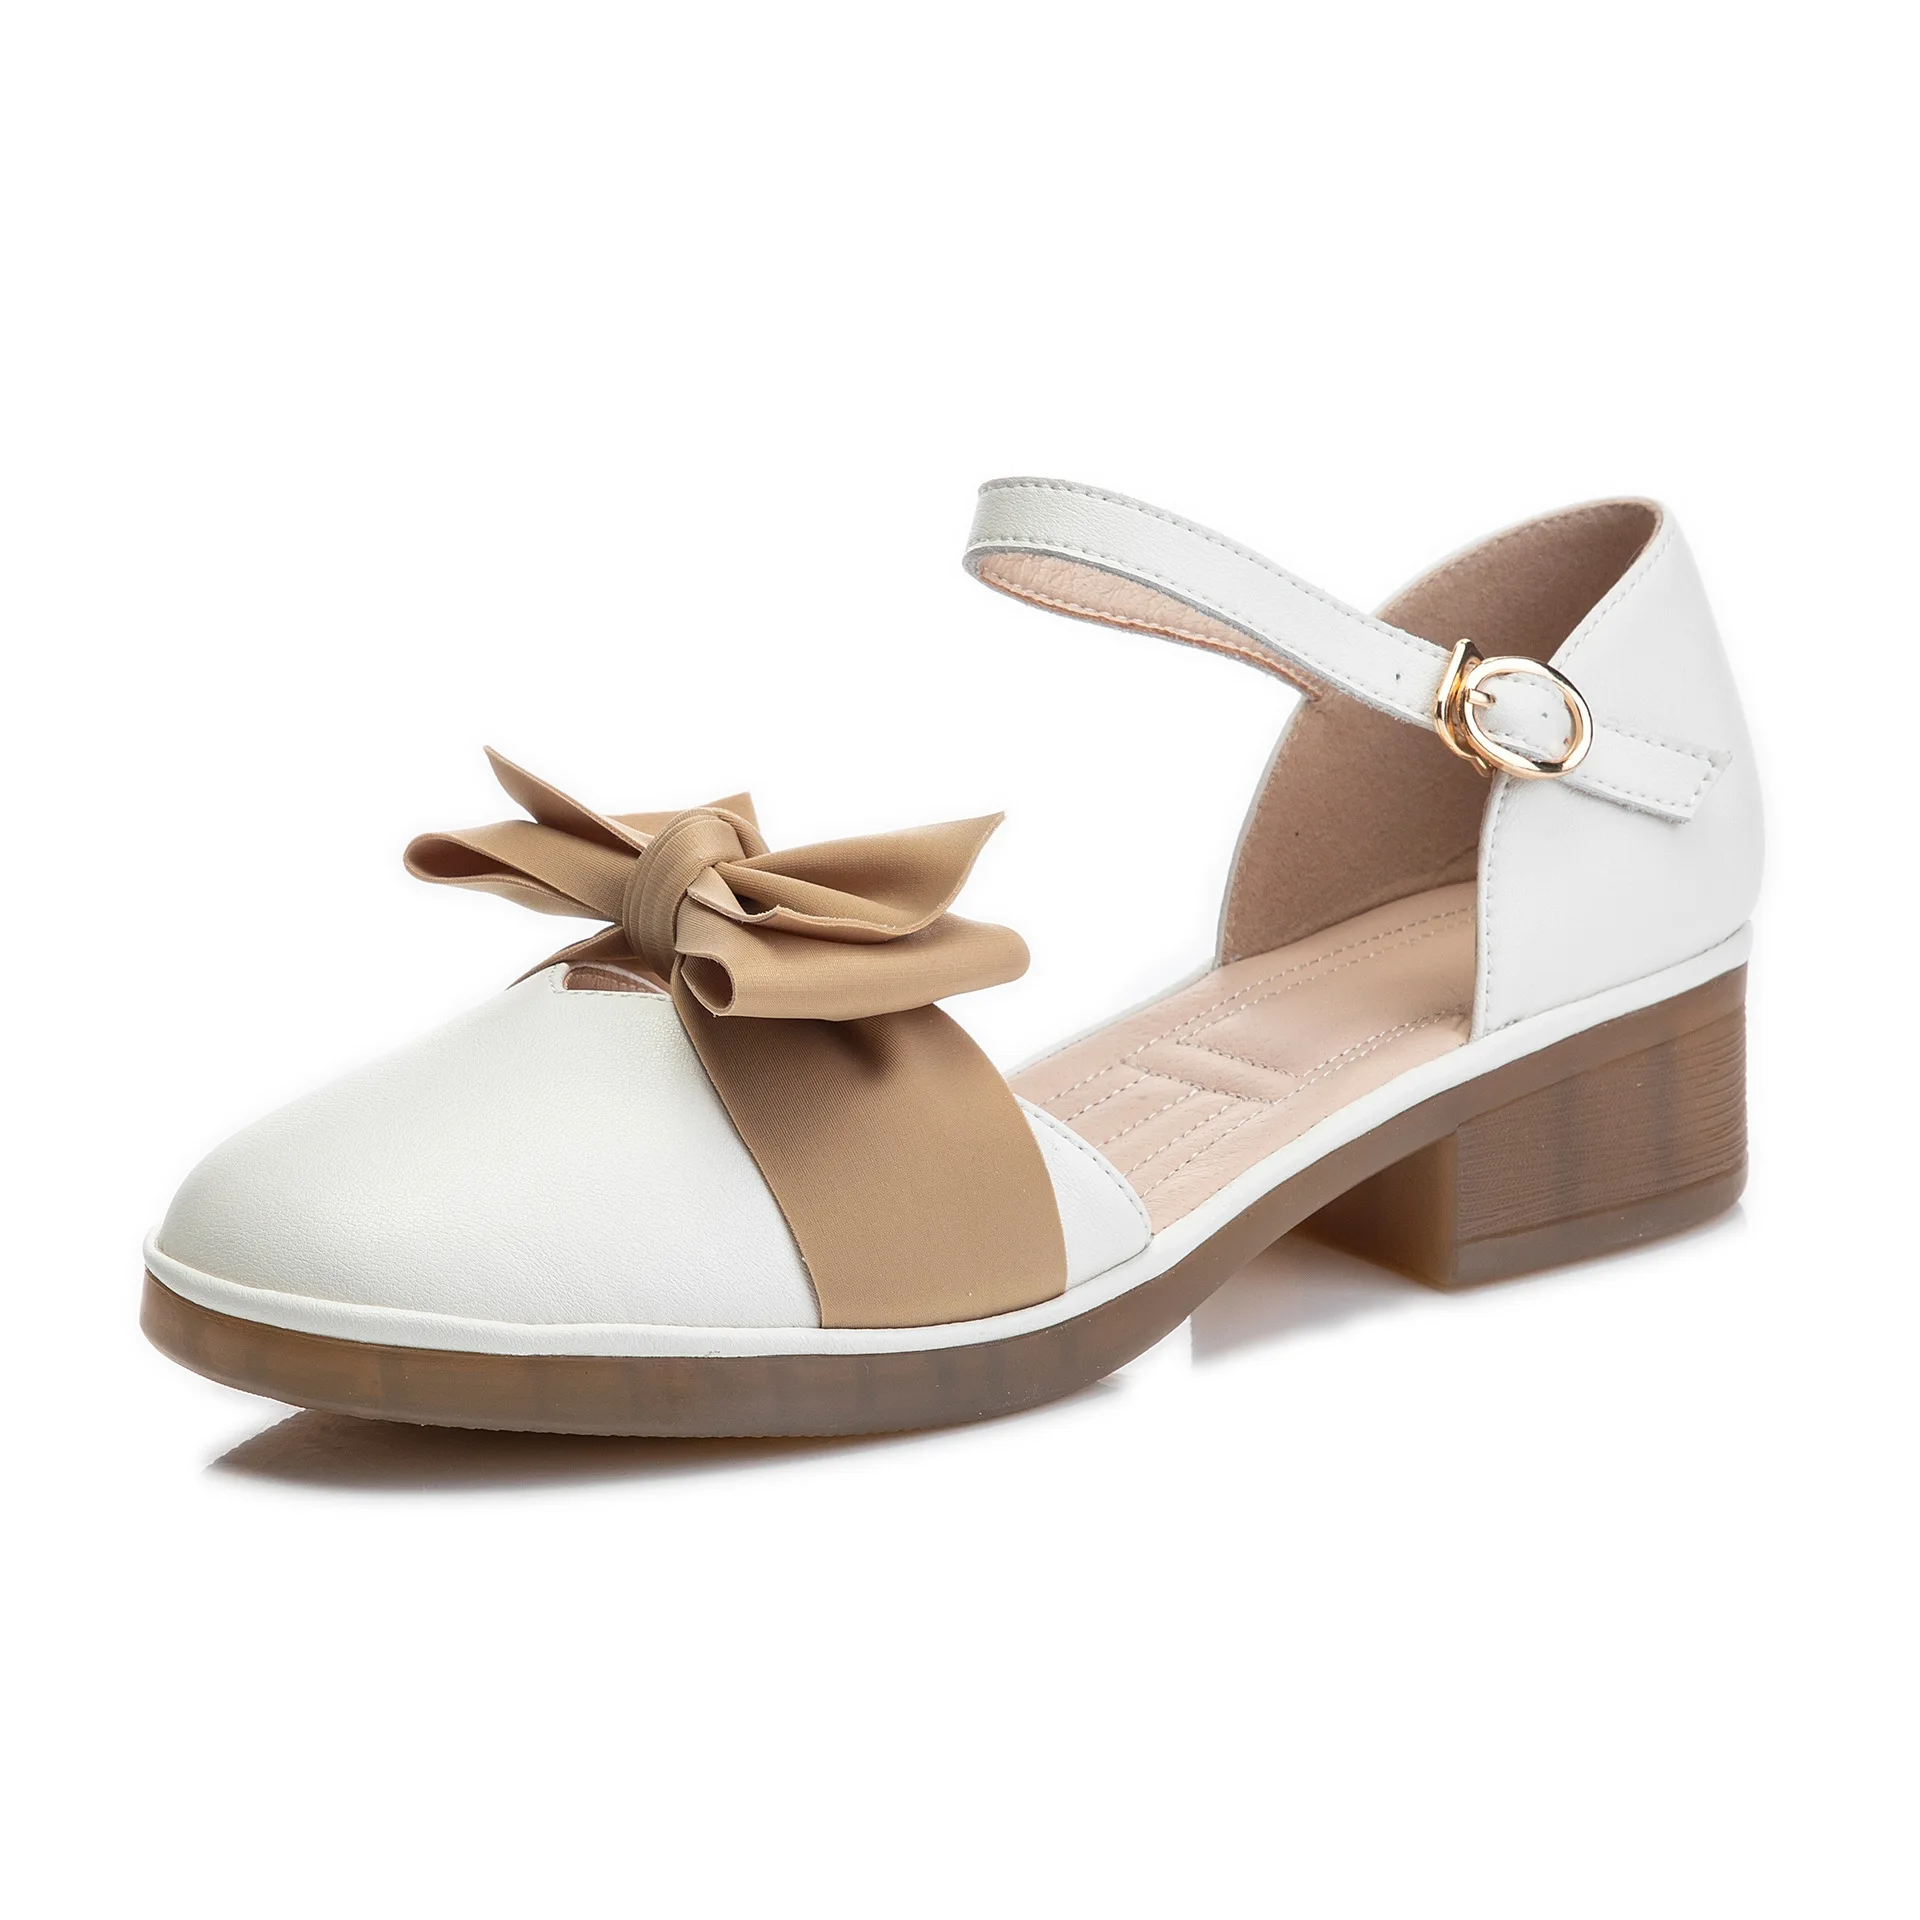 

Wholesale Baotou Sandals Women's Spring And Summer 2021 New Fashion Casual Leather Coarse-Heeled Platform Women's Shoes, Rice apricot, milk curry color